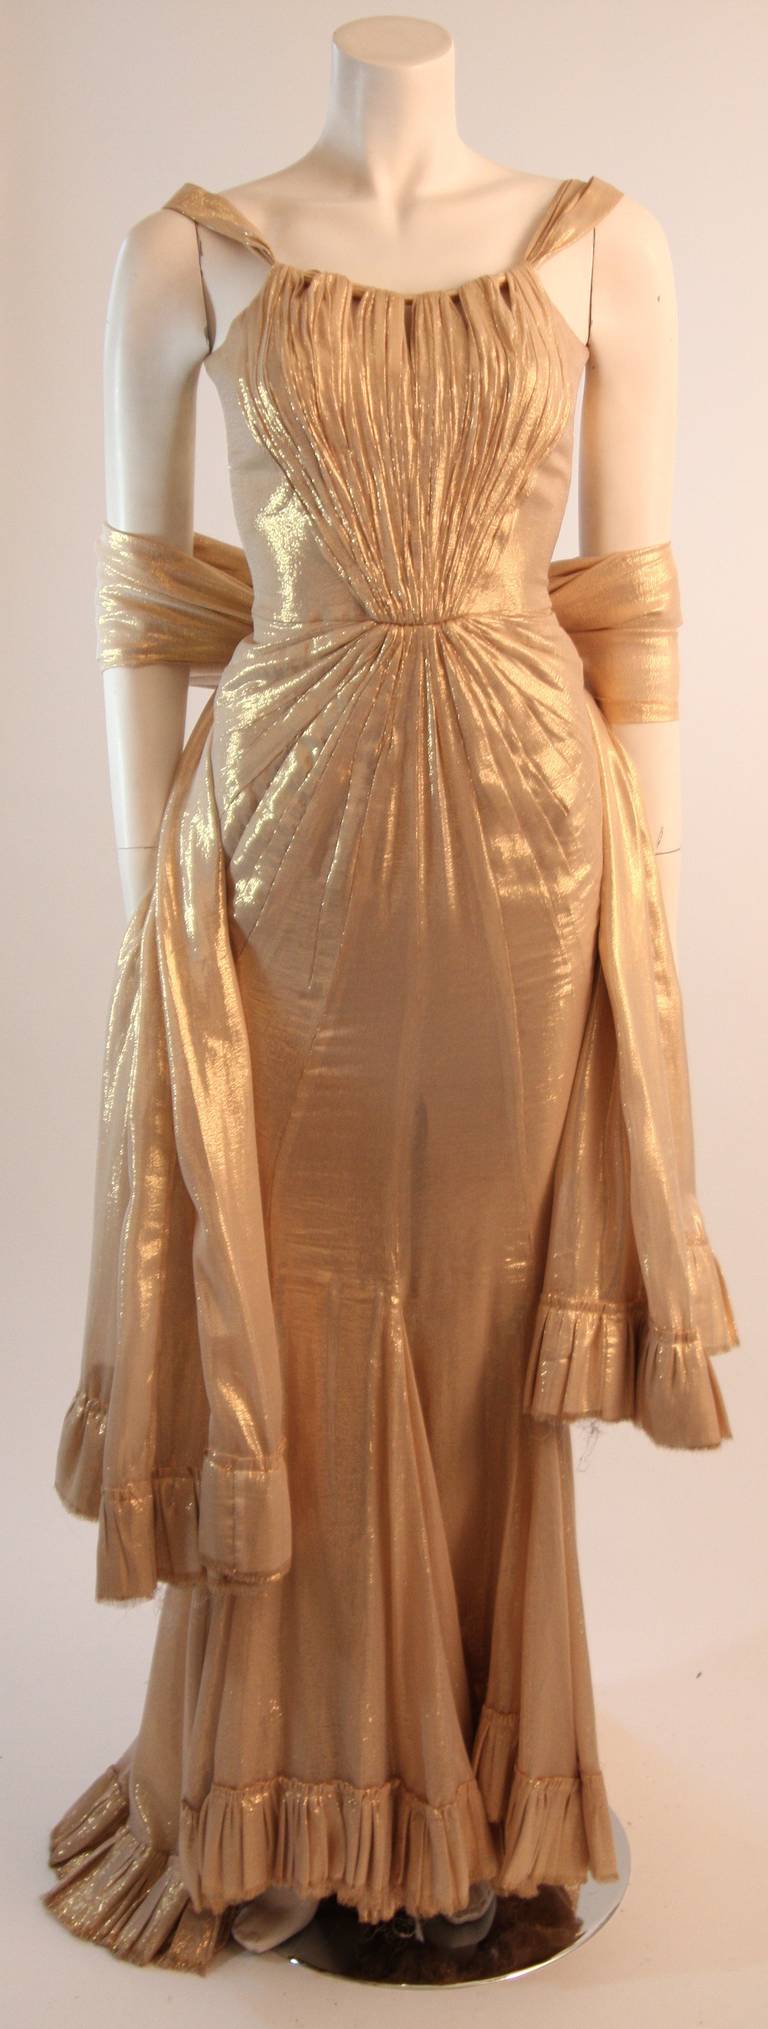 Fashioned from the finest gold silk lame, this exquisite gown presents a gorgeous body skimming silhouette with a flared hem. The center front bodice features all hand finished details. 

This is a couture custom order and is available in a variety